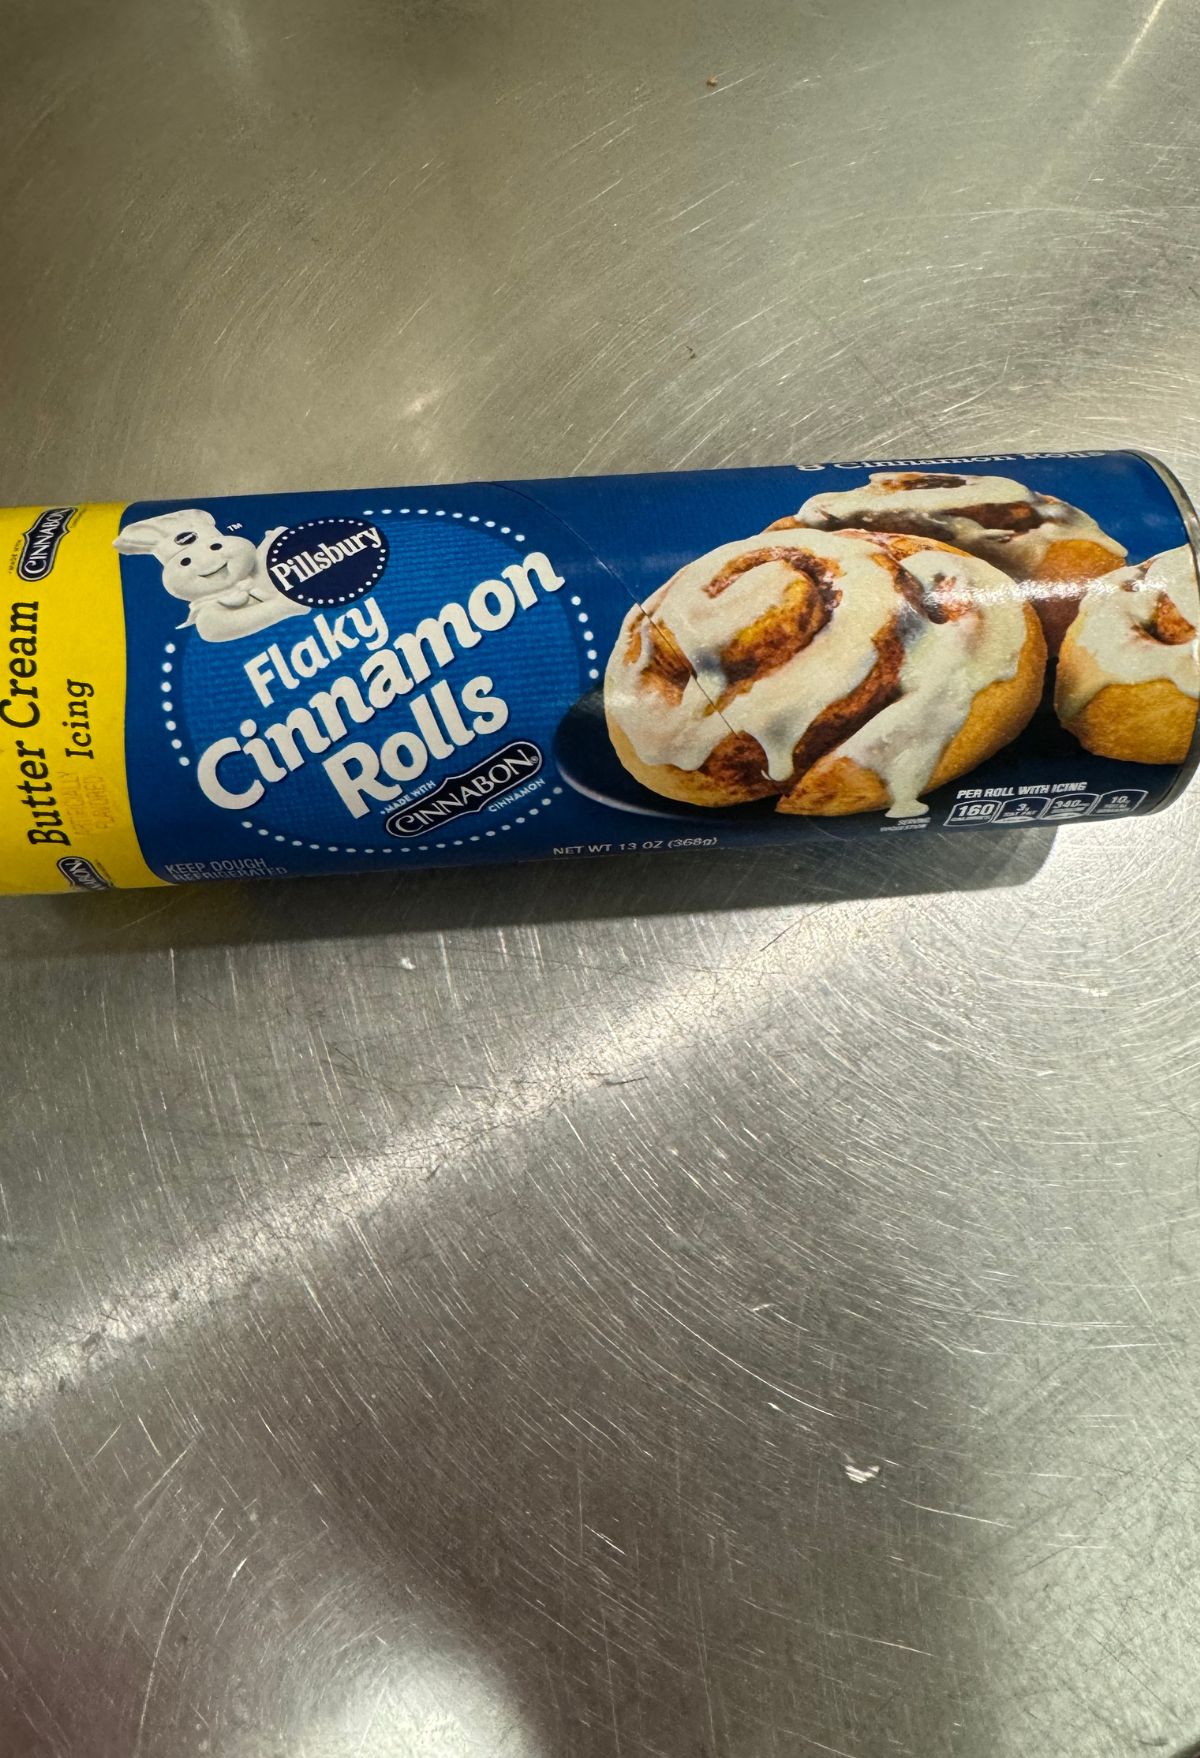 Package of pillsbury flaky cinnamon rolls with icing on a metal surface.